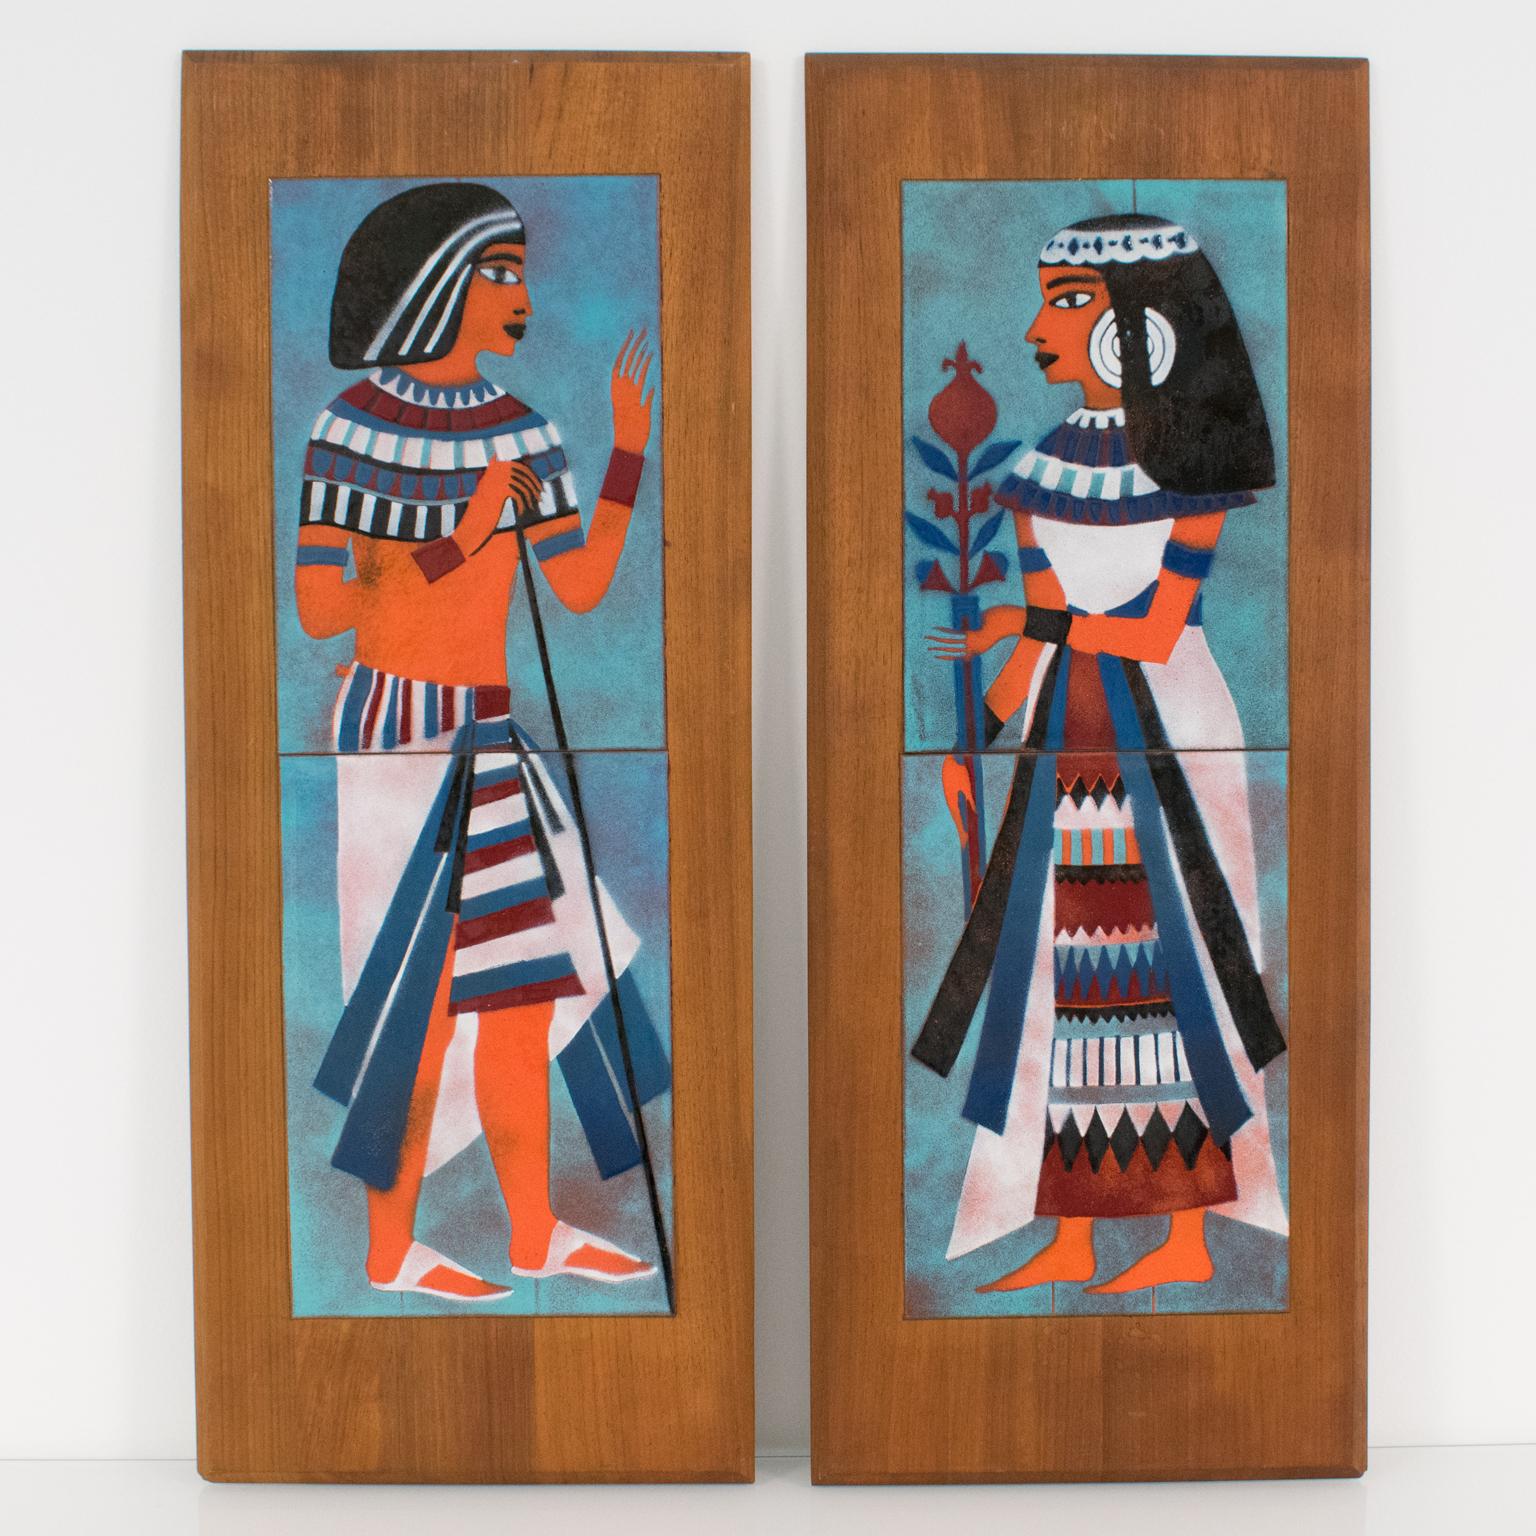 Stunning Mid-Century modernist enamel on copper artworks created by Judith Daner. This lovely pair of decorative panels feature two tile plaques mounted together on the original oakwood frame and depicts an abstract and stylized representation of